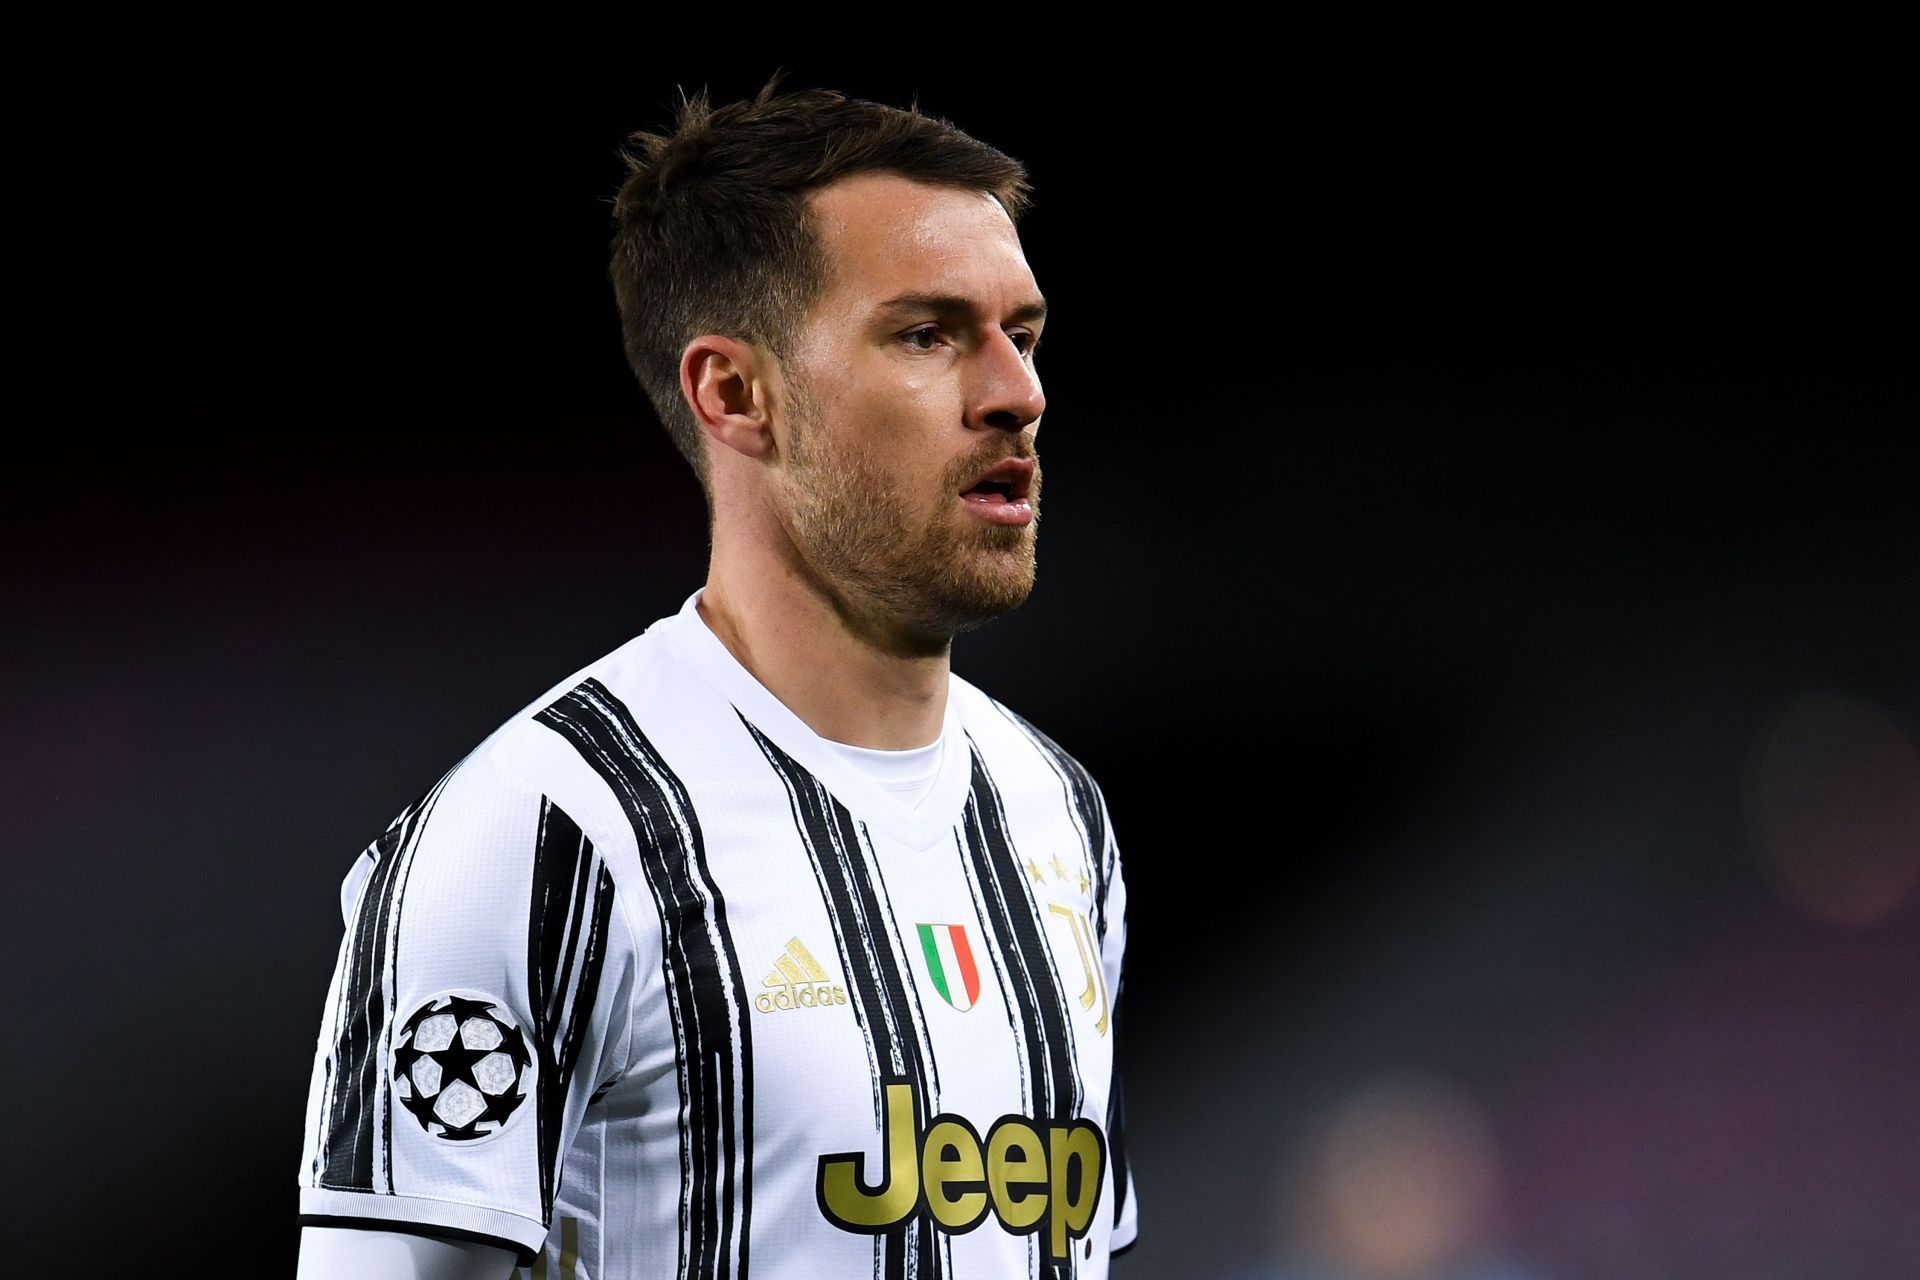 A high-profile loan switch could be on the cards for the Juventus midfielder.